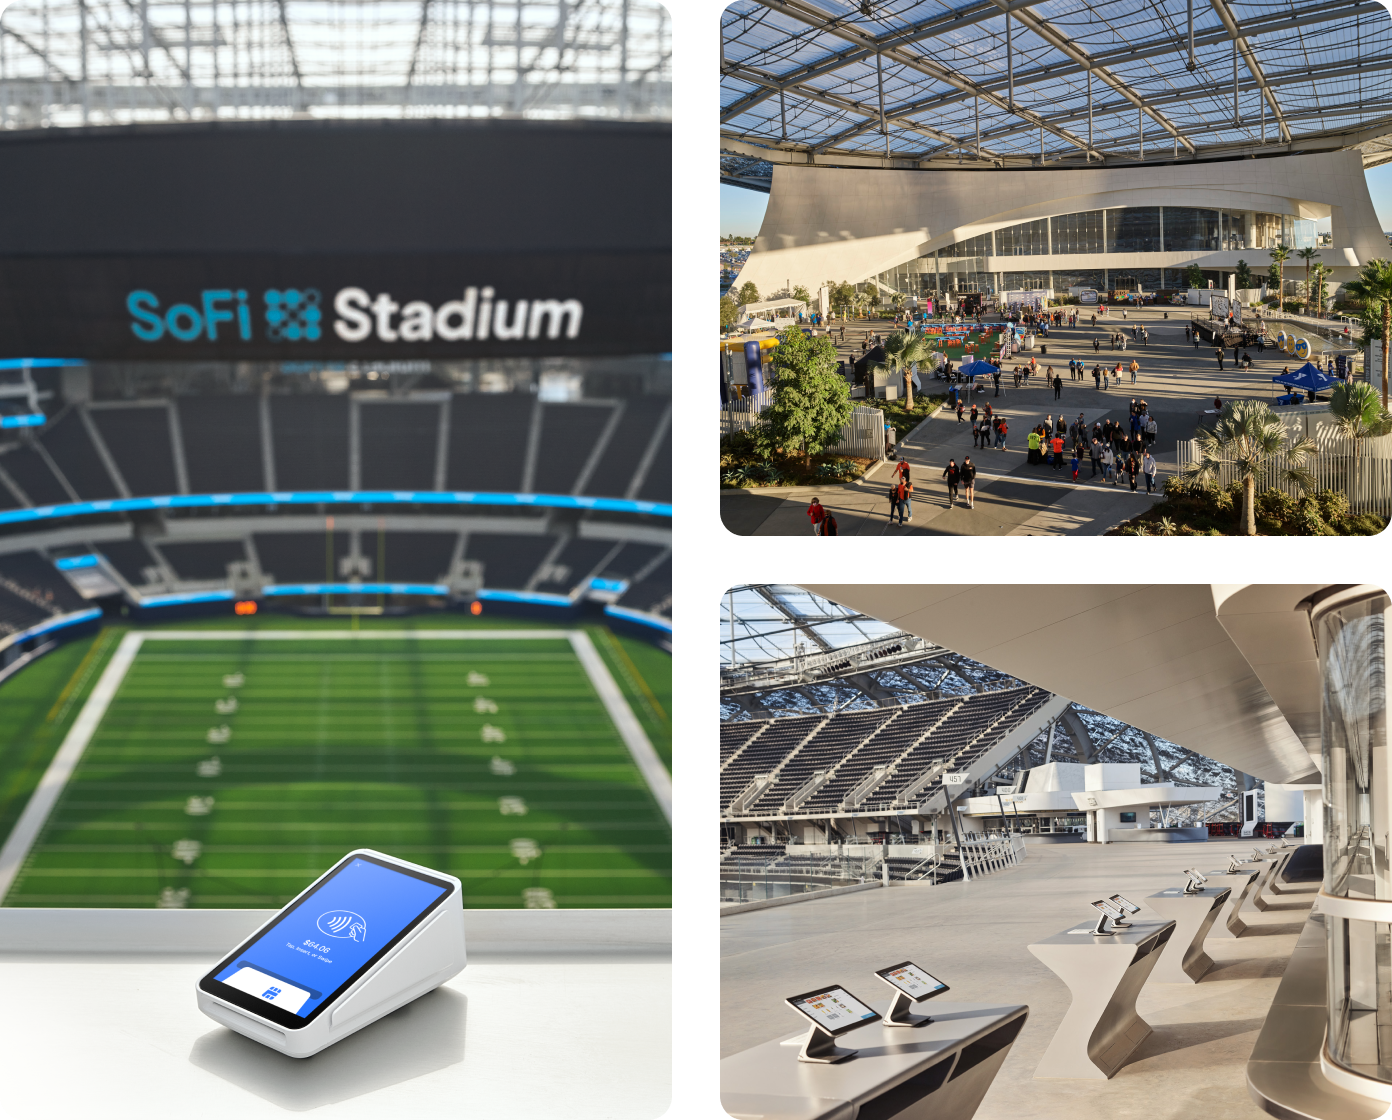 At SoFi stadium showing a Square Terminal, a row of Square Registers, and the inside of the stadium